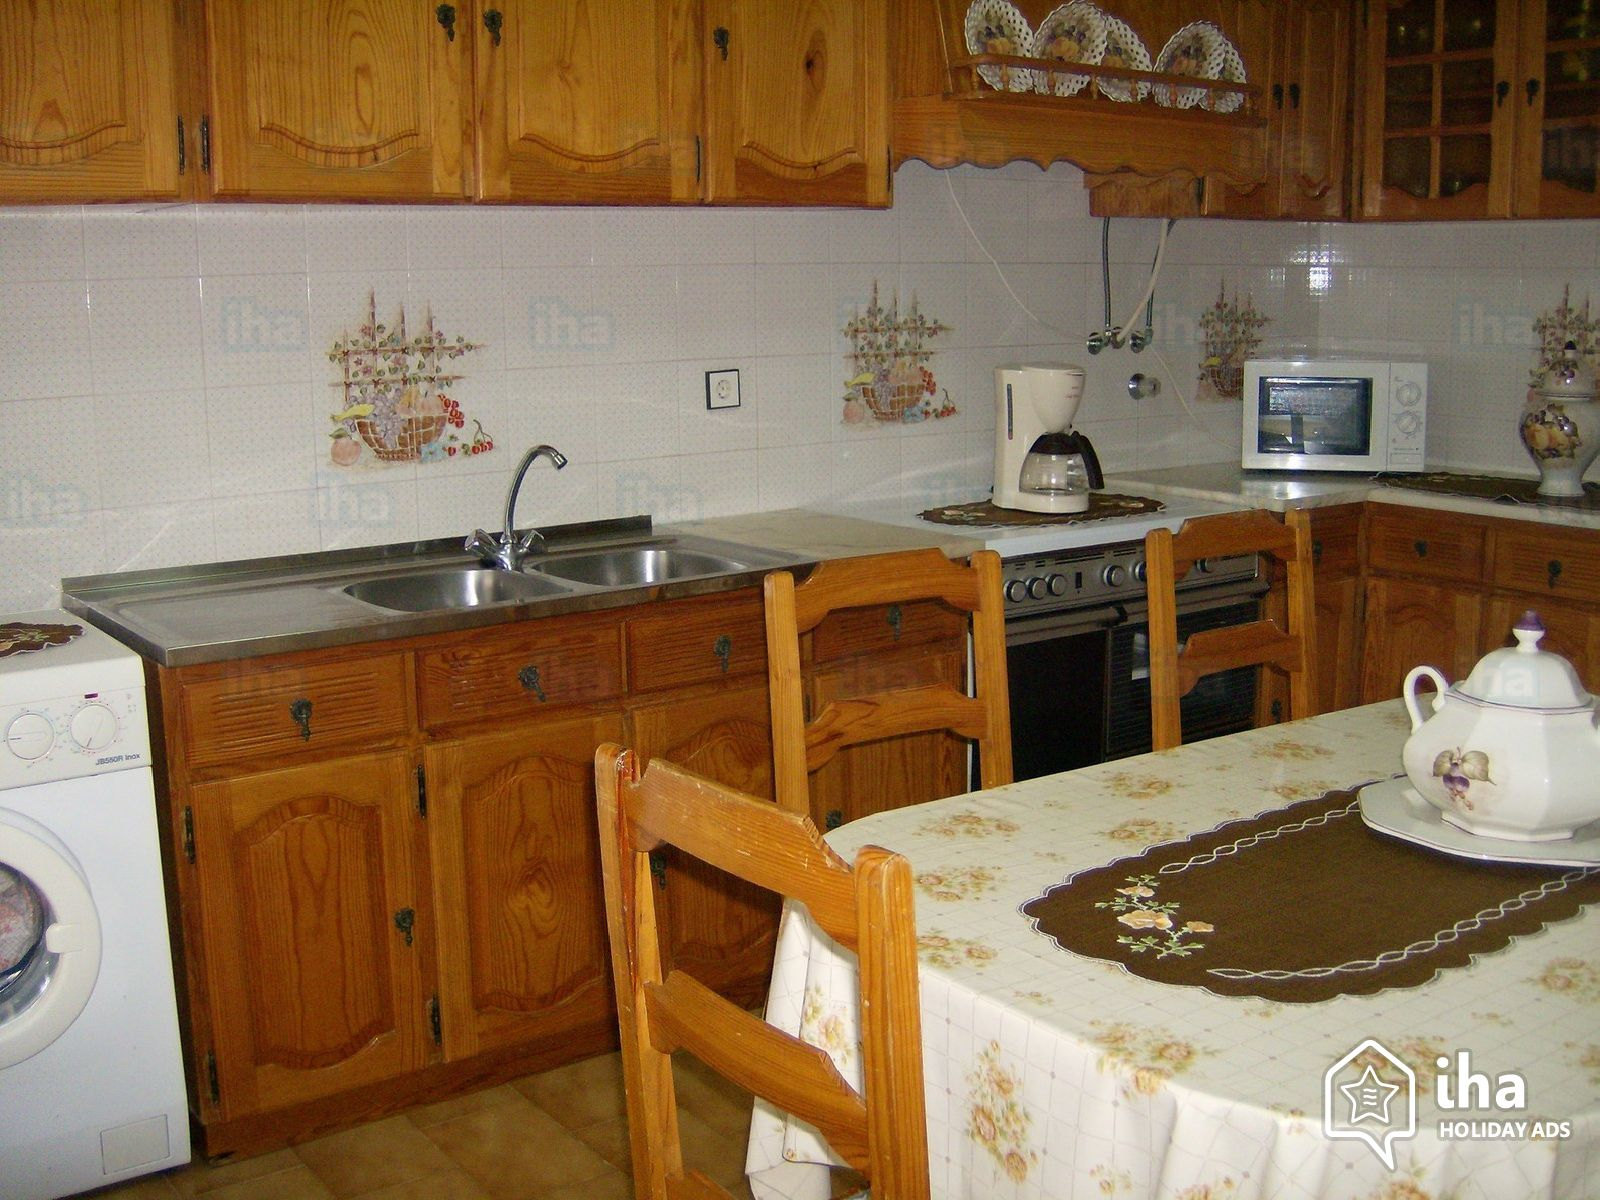 3 Bedrooms Villa For Rent From 2 To 8 People concernant Location Maison Portugal Piscine